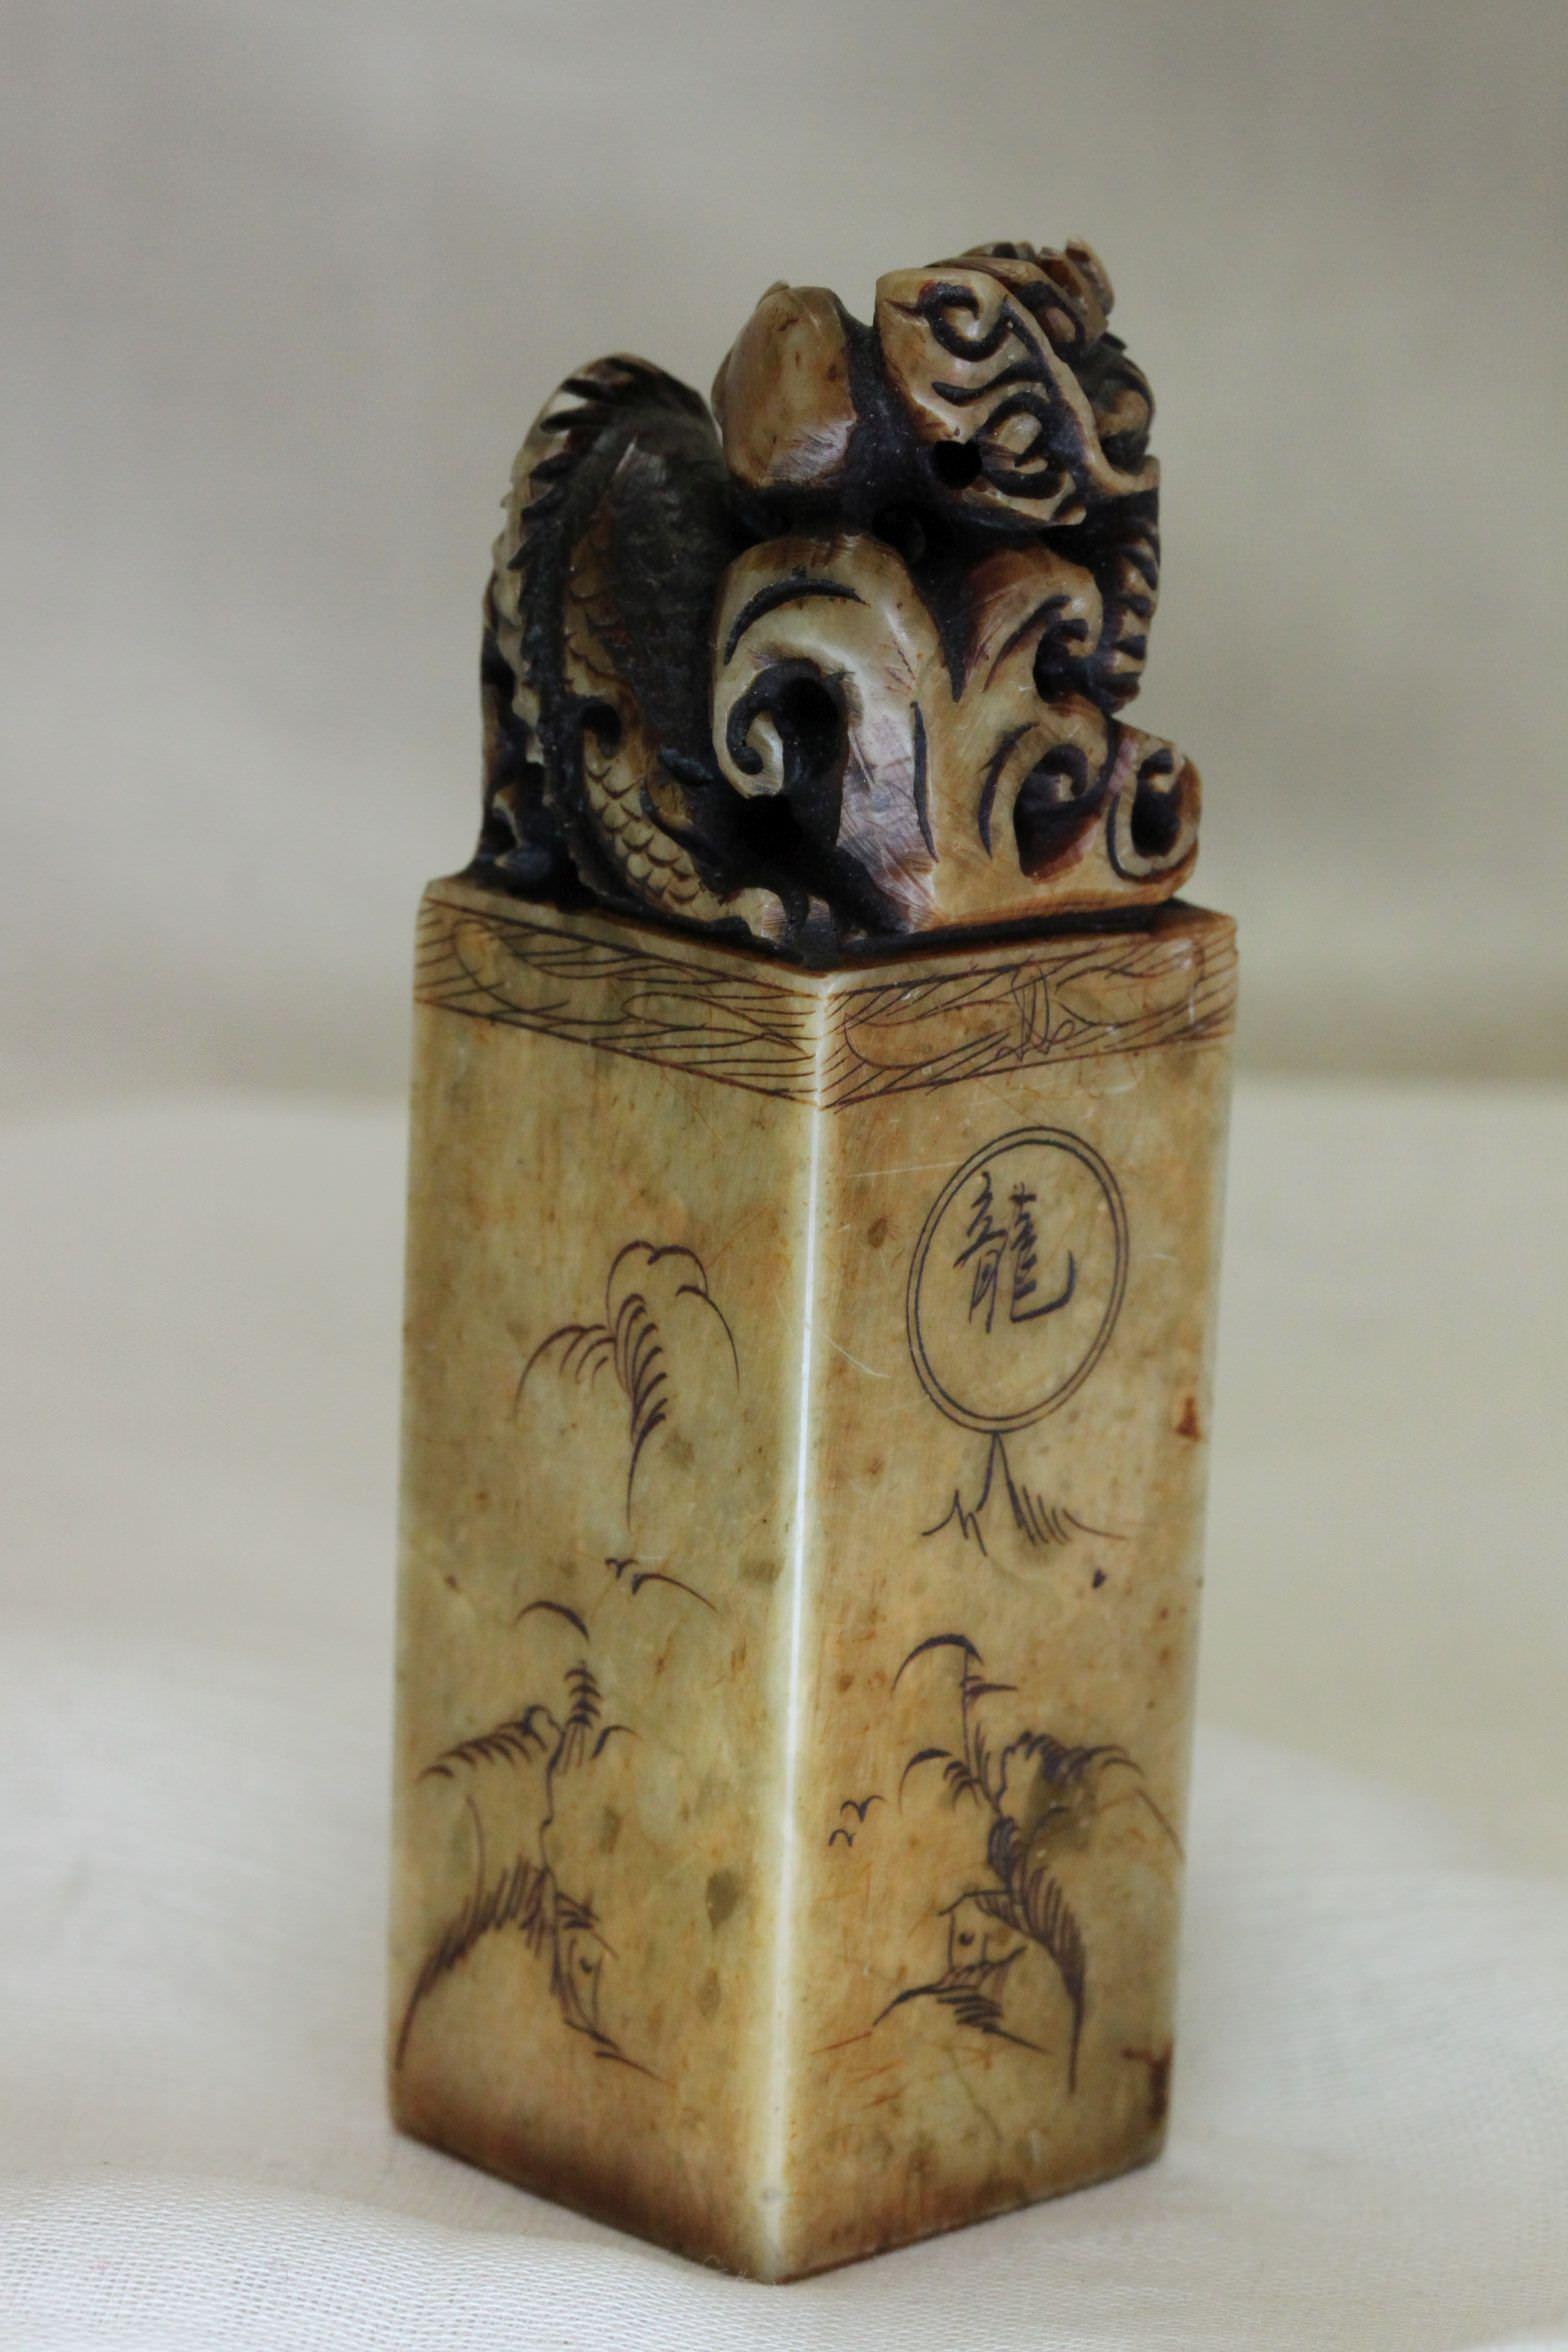 A nicely carved dragon with a pearl sits atop this Chinese soapstone seal, with the areas under the dragon decorated as well. The base carries the original owner's mark. It stands 85 mm (3 3/8ths inches) high and measures 24 mm ( 1 inch) square. It